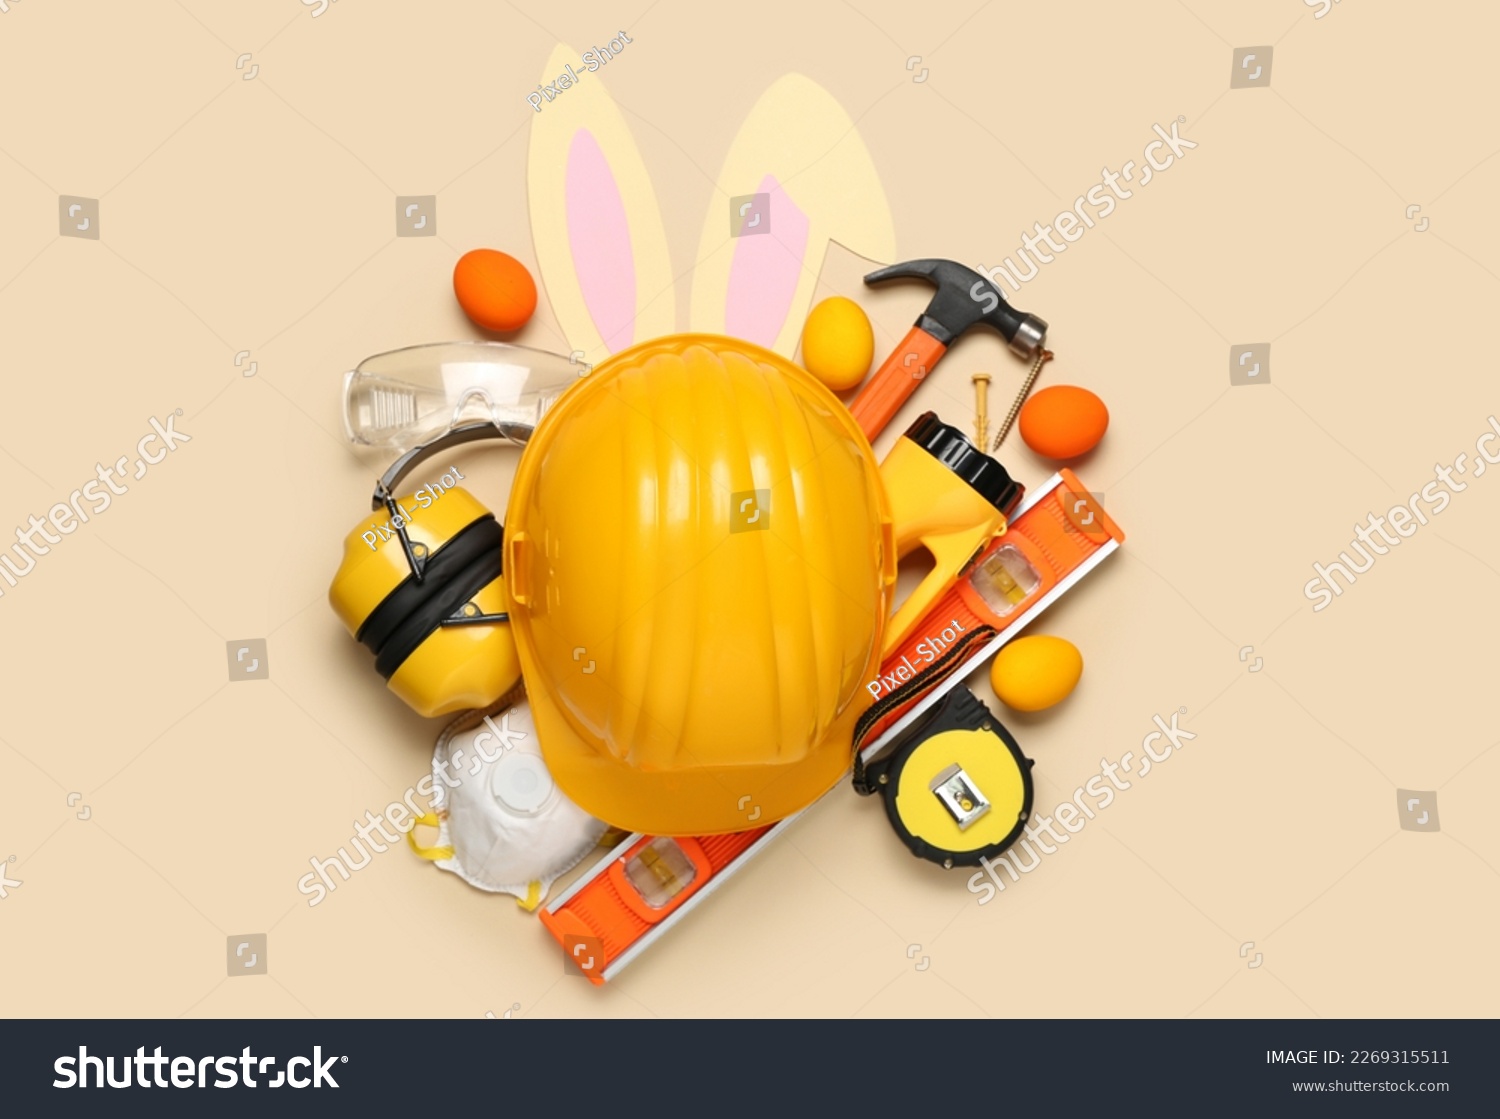 Builder's equipment with bunny ears and Easter eggs on beige background #2269315511